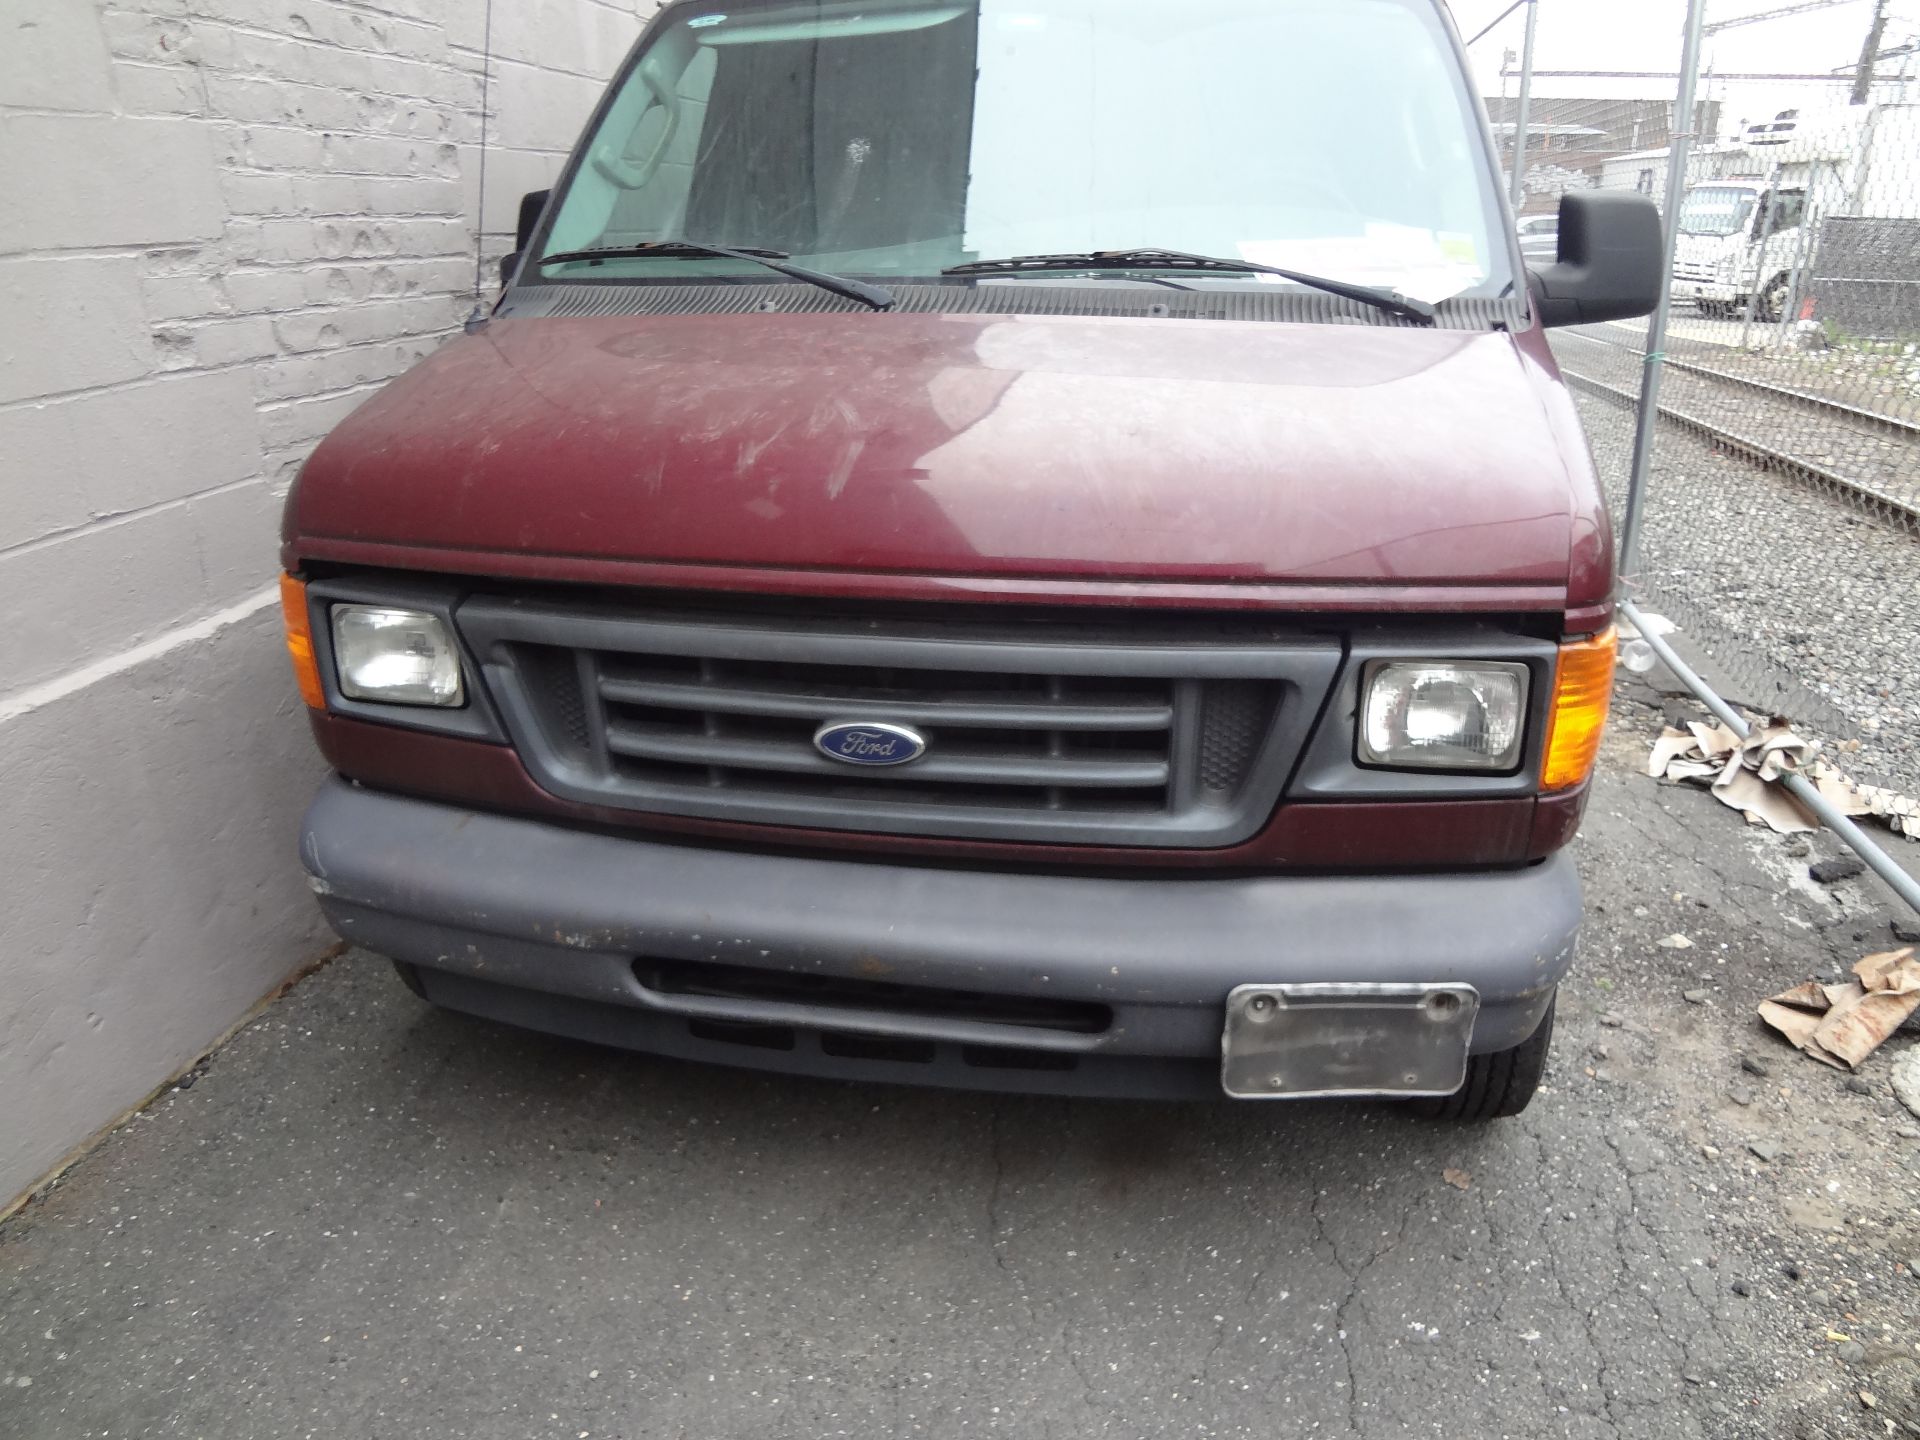 2006 FORD E-250 WORK VAN, APPROXIMATELY 148,000 MILES - Image 2 of 17